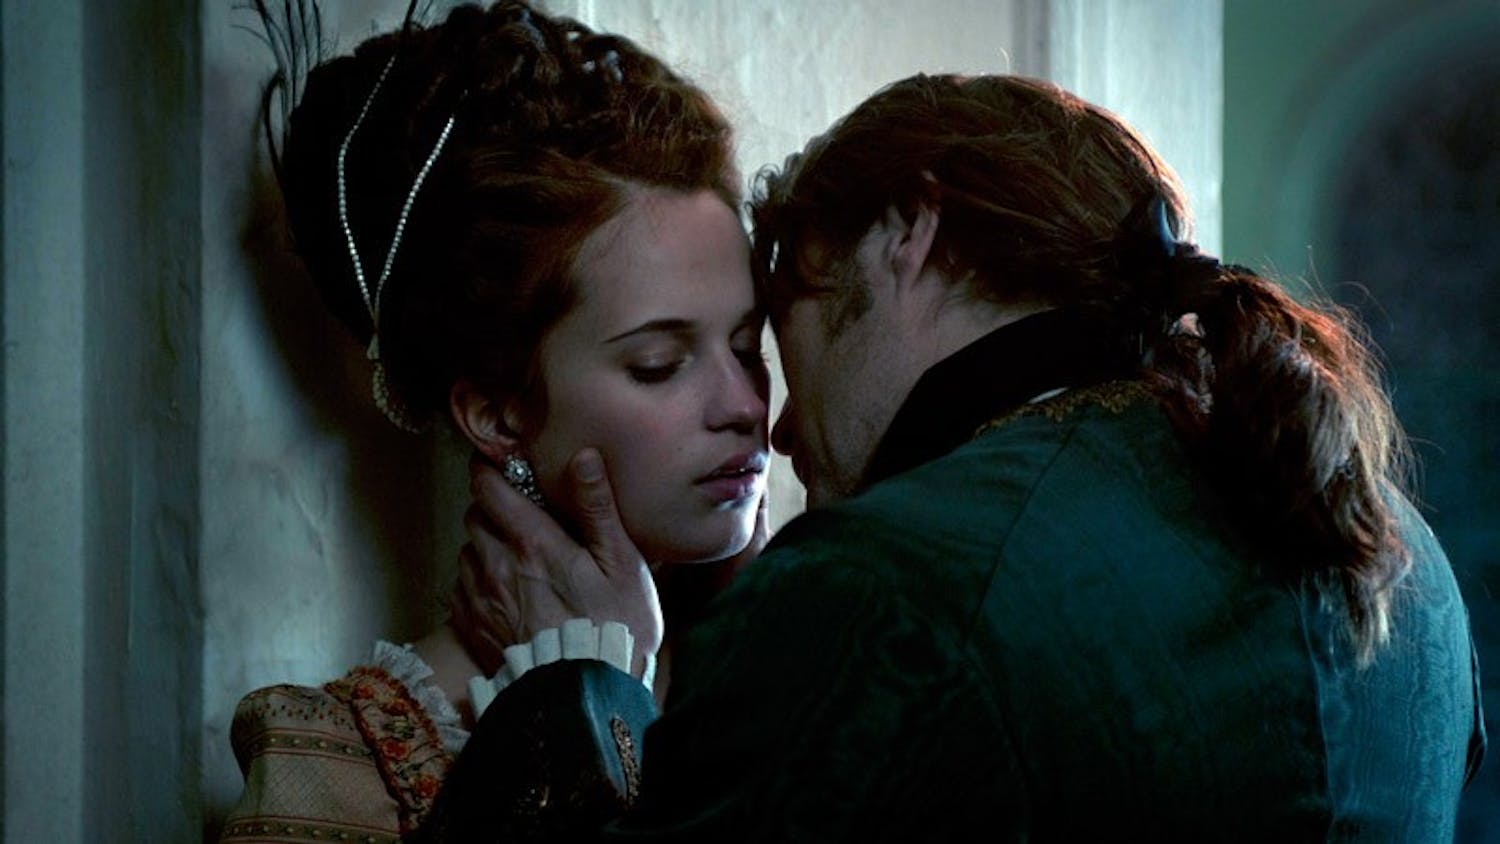 A film from Denmark, "A Royal Affair," exposes students to movies and film techniques from another part of the world.